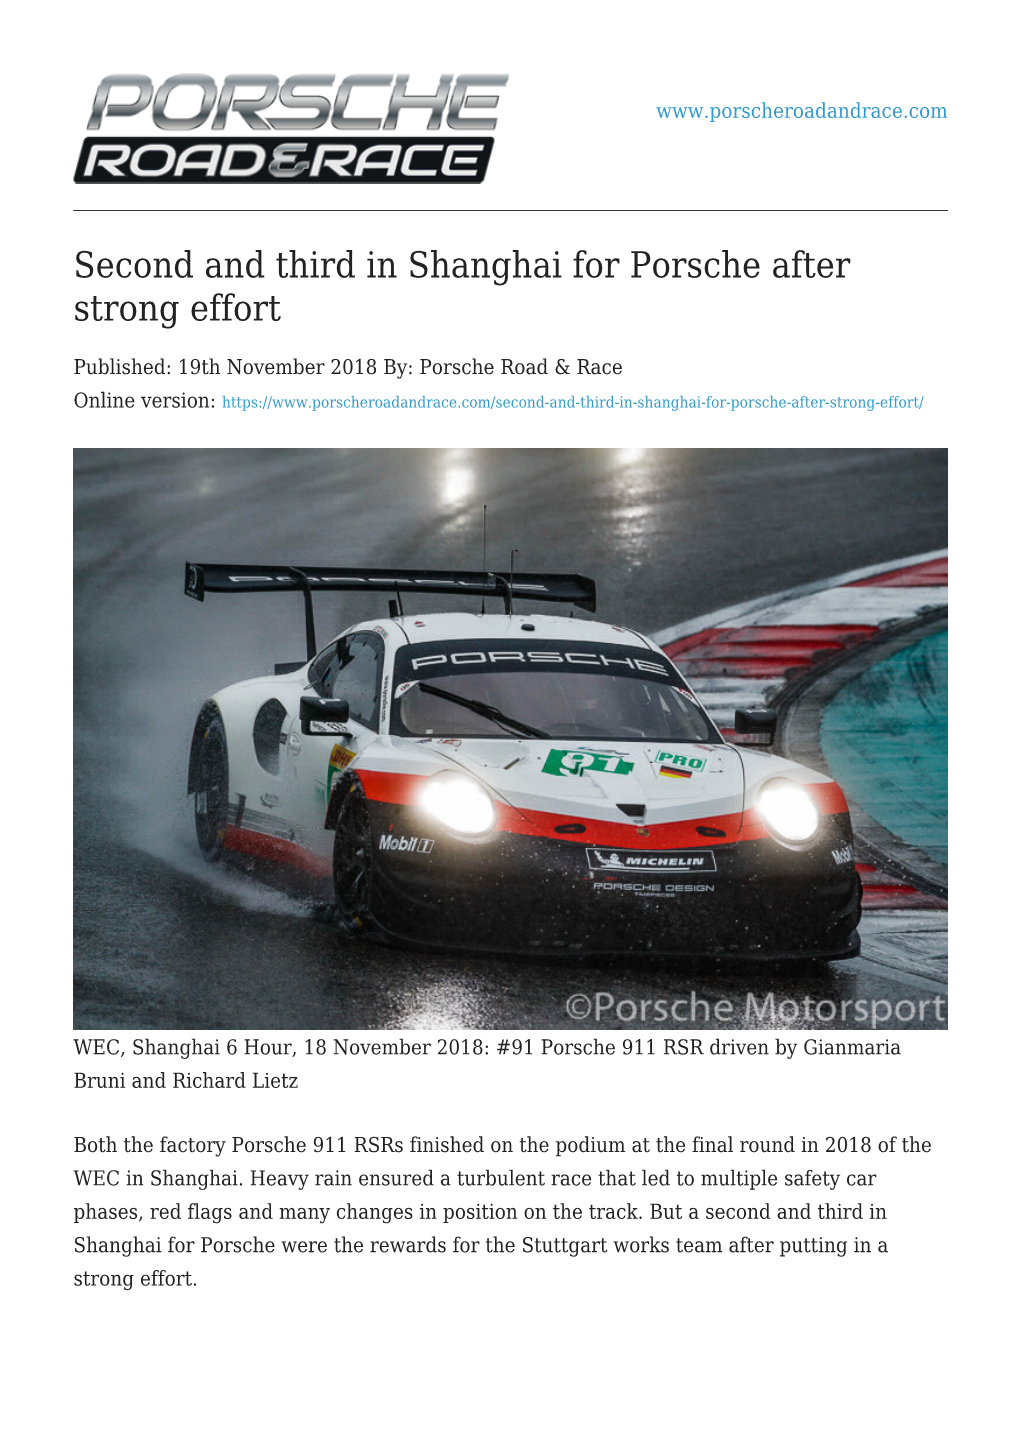 Second and Third in Shanghai for Porsche After Strong Effort